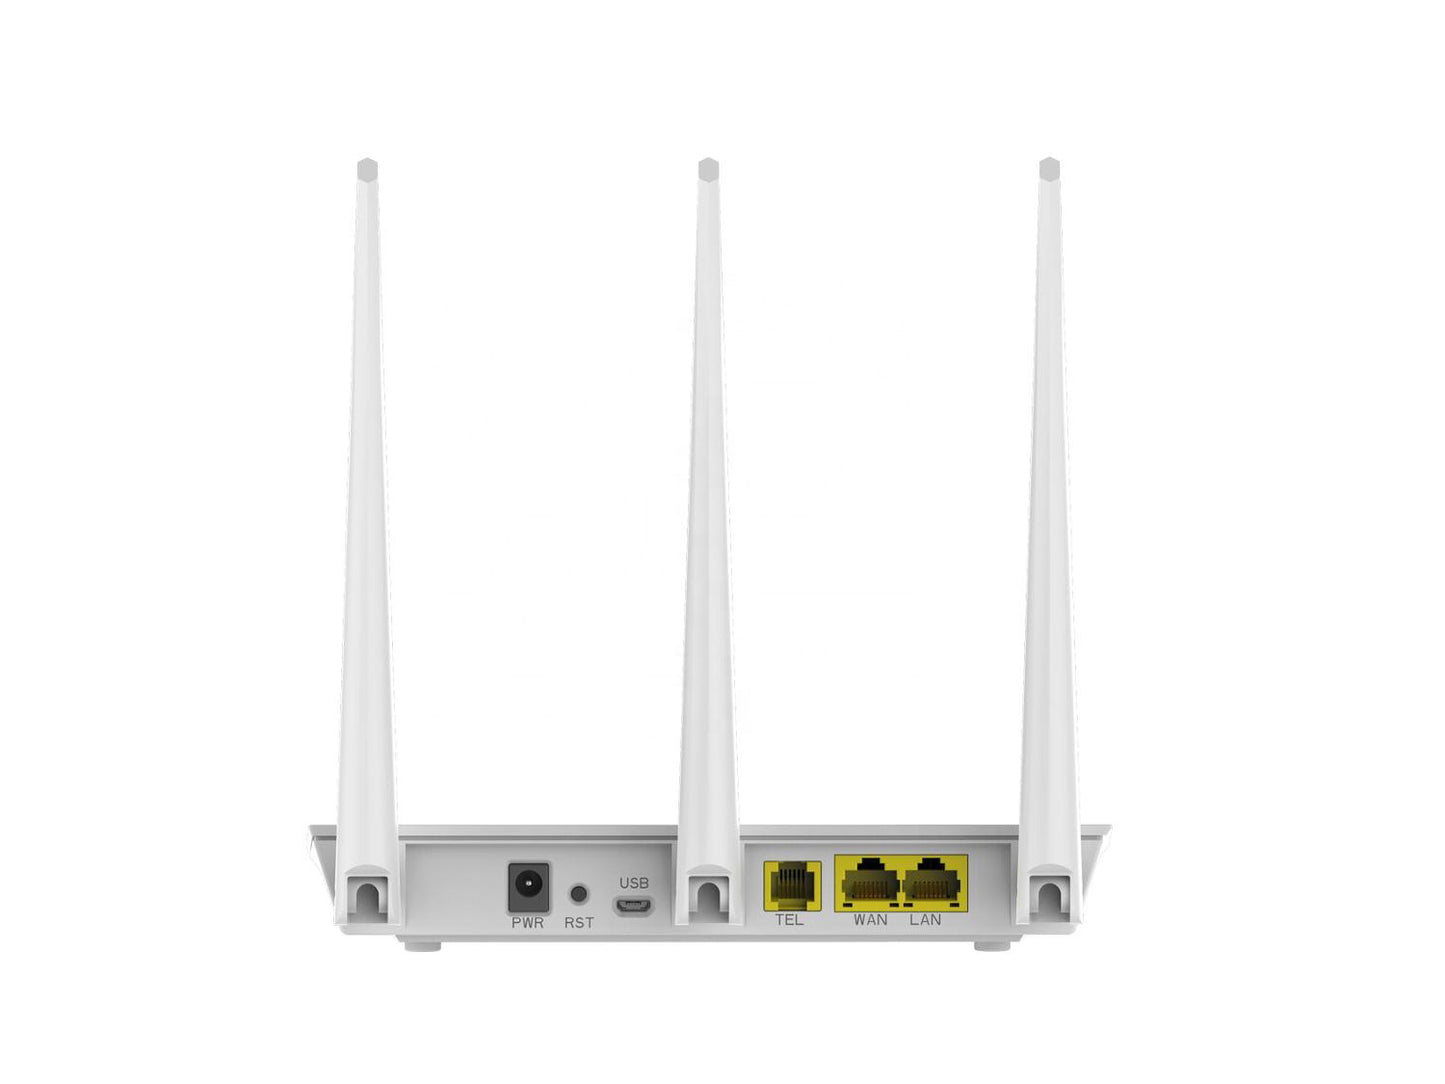 BDI 4G LTE Wireless Router with VoIP/VoLTE/CS